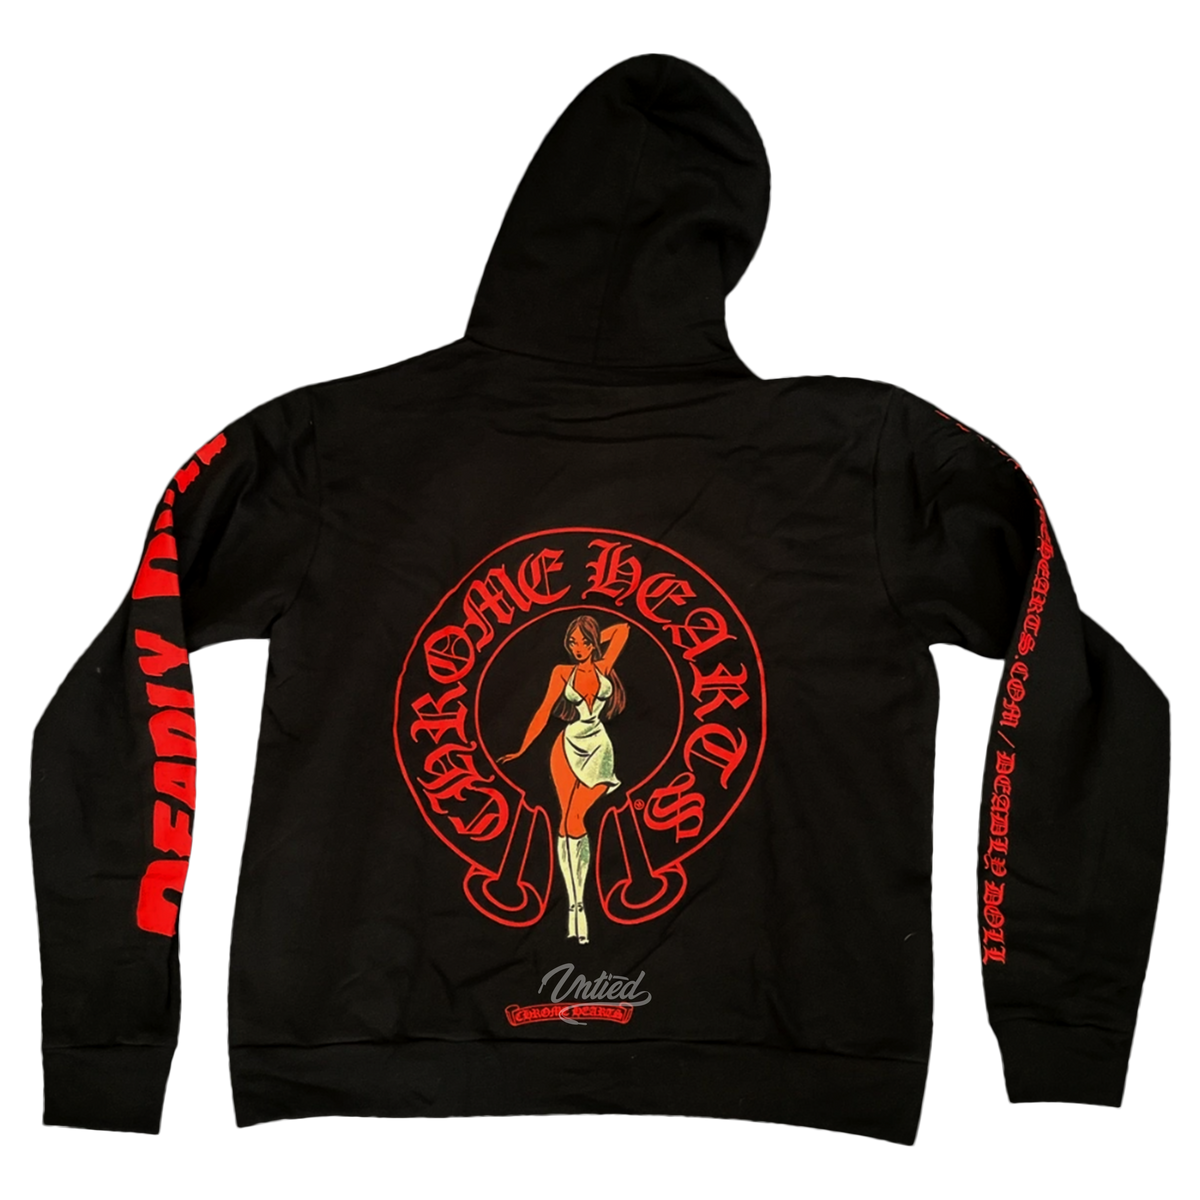 CHROME HEARTS ONLINE EXCLUSIVE HORSESHOE HOODIE BLACK/PINK – Bank of Hype